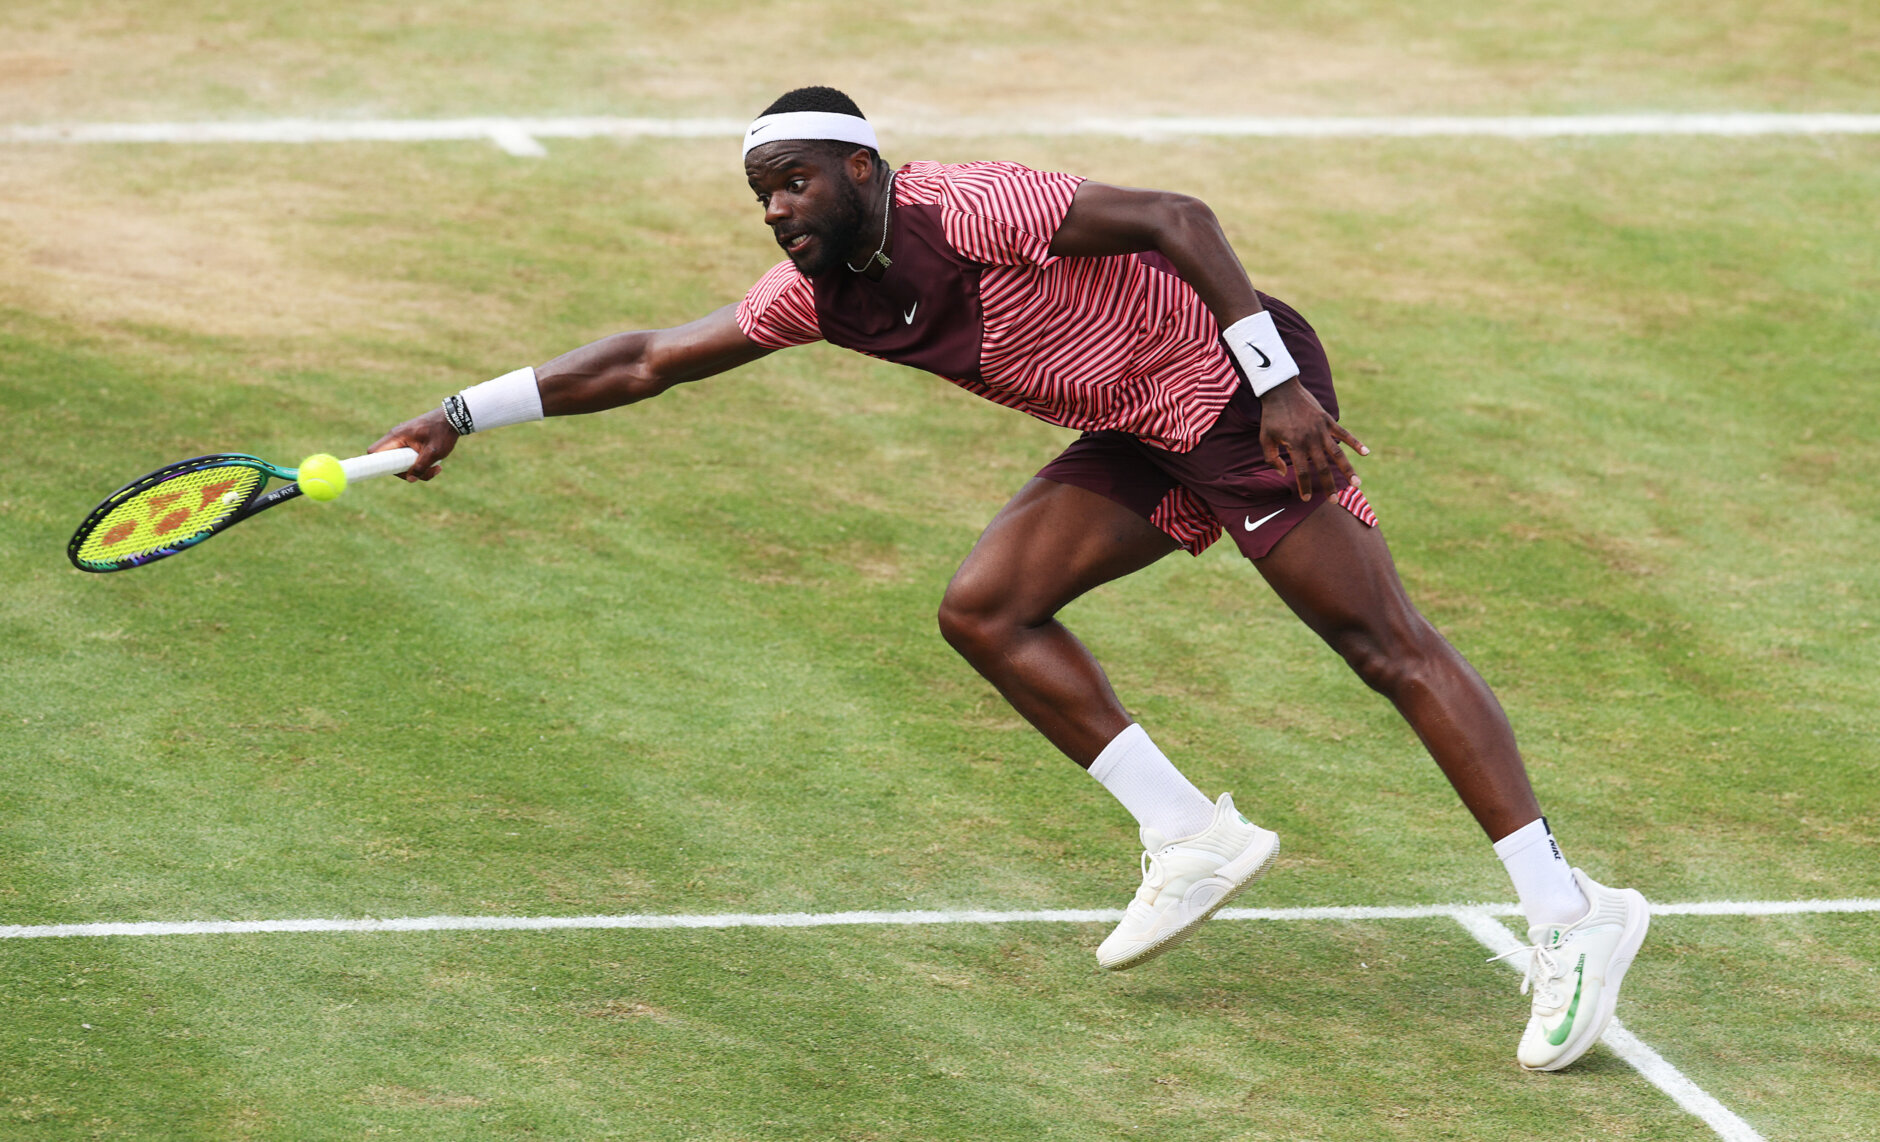 STUTTGART, GERMANY - JUNE 18: Frances Tiafoe of the United States gets the volley back to win2 match point over Jan-Lennard Struff of Germany hits during the mens final match on day nine of the BOSS Open at Tennisclub Weissenhof on June 18, 2023 in Stuttgart, Germany.